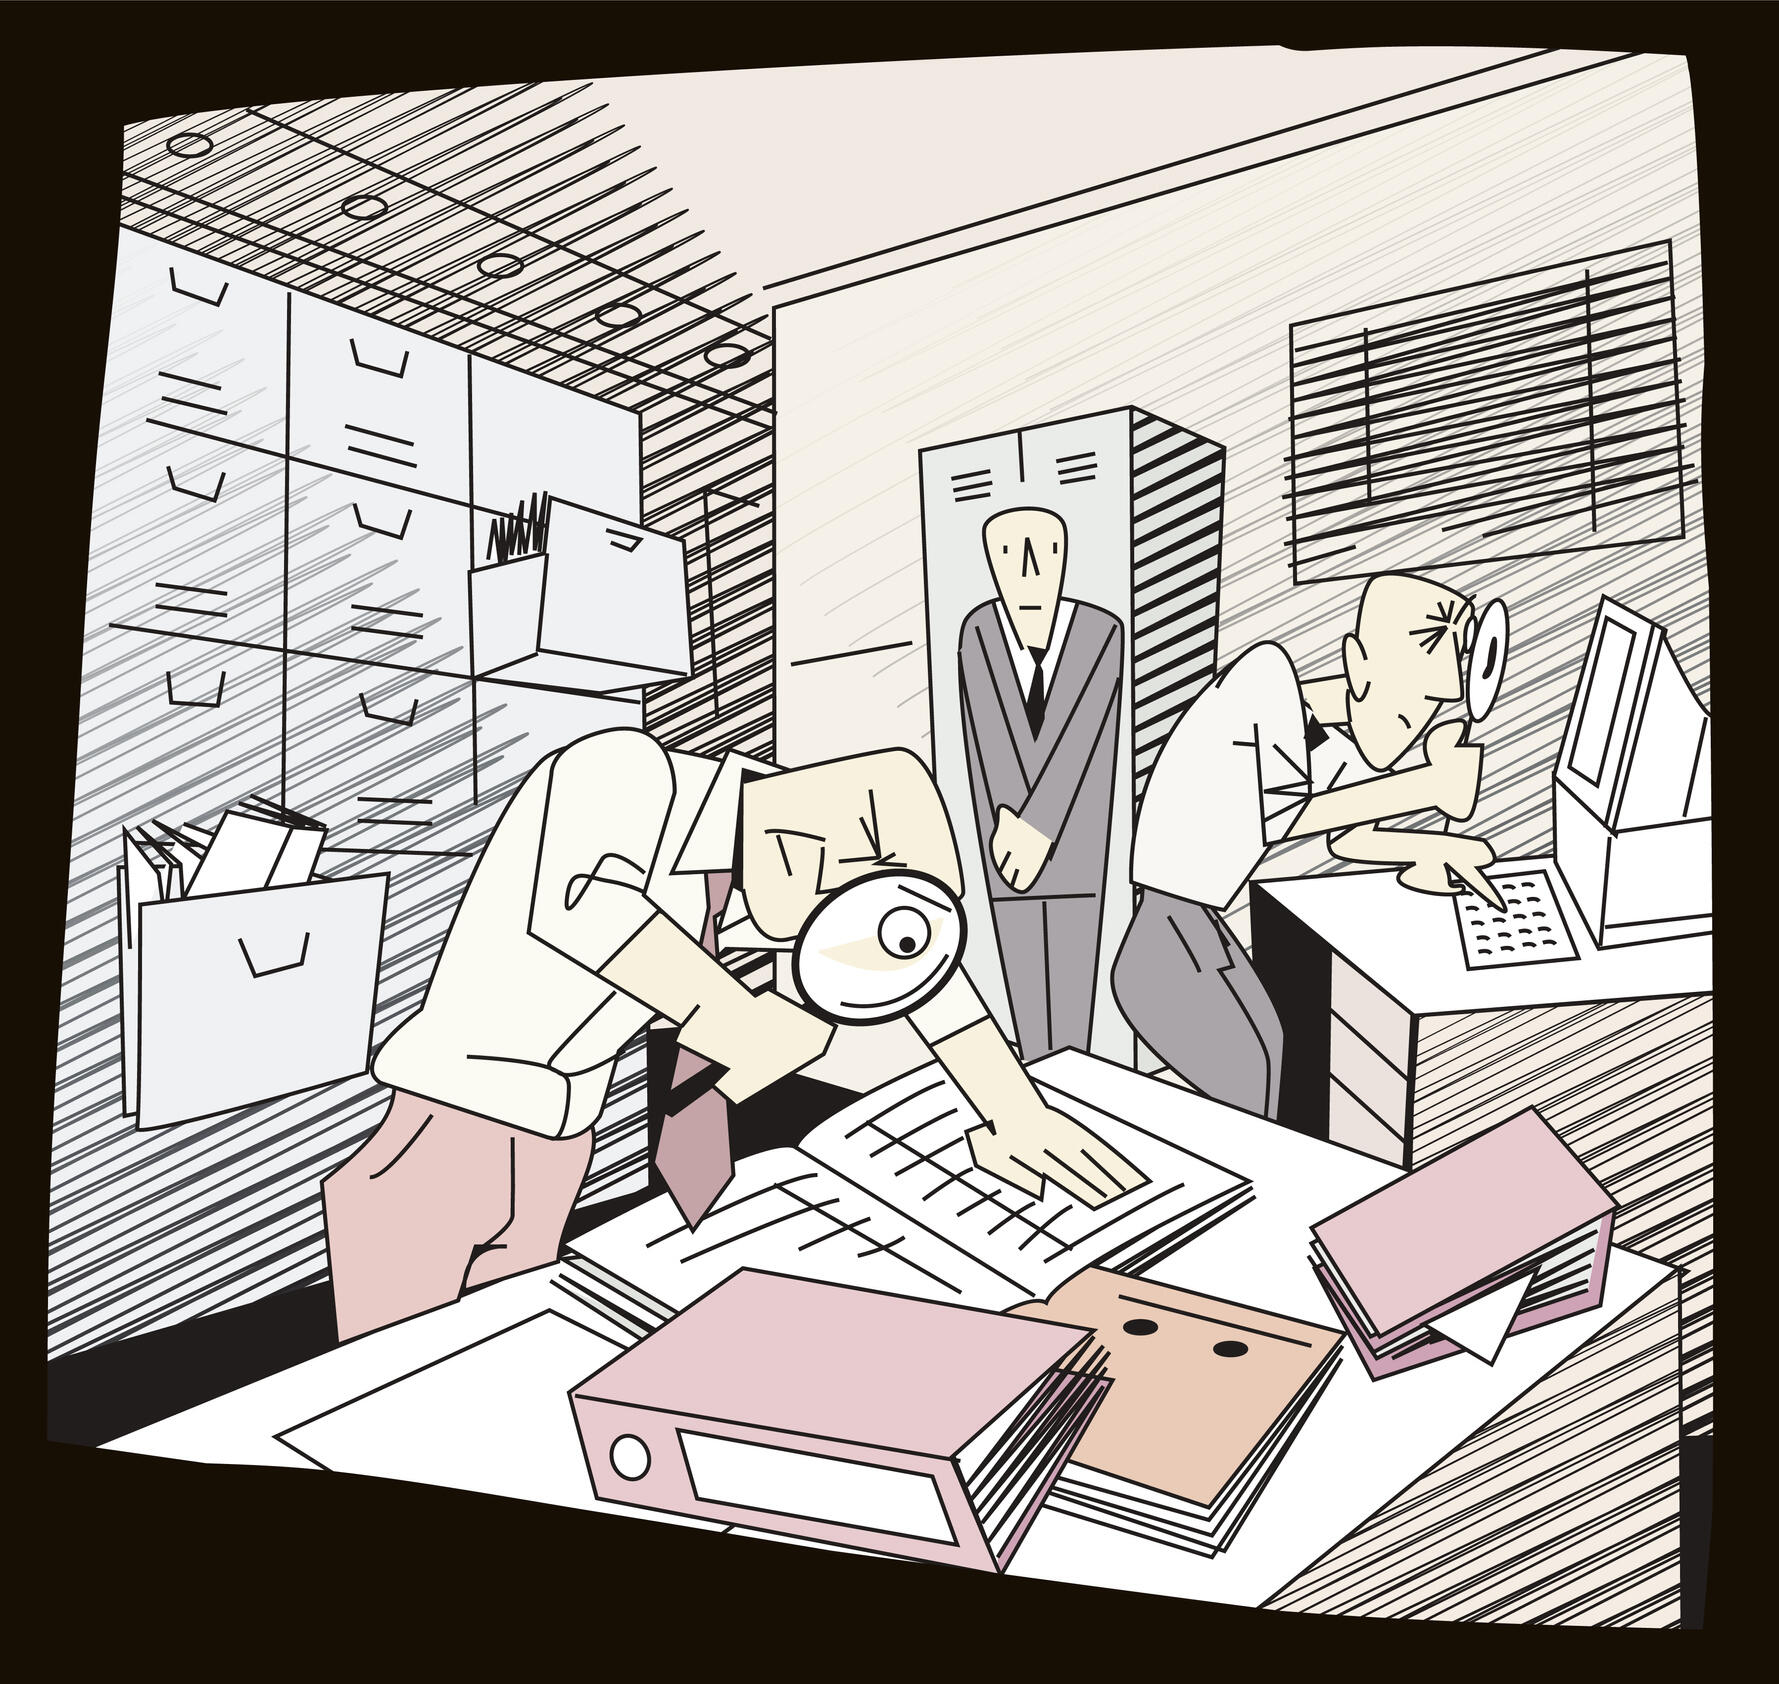 An illustration of two men with magnifying glasses examining a book and computer screen. Another man wearing a suit stands against the wall with his hands in front of him. 